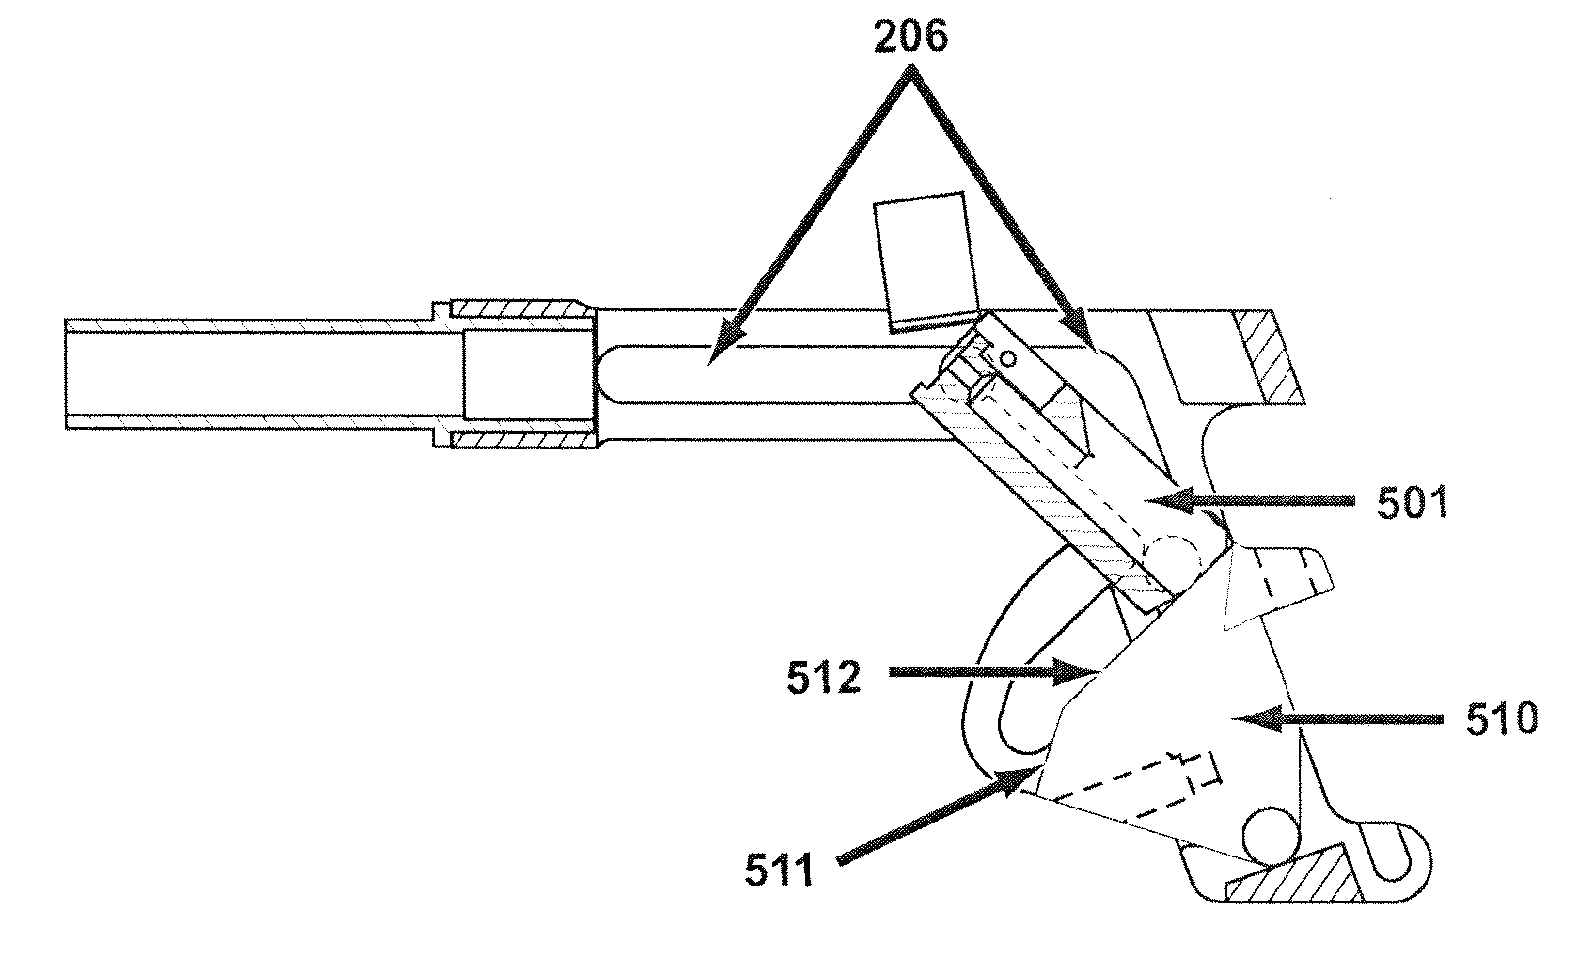 Firearm with enhanced recoil and control characteristics